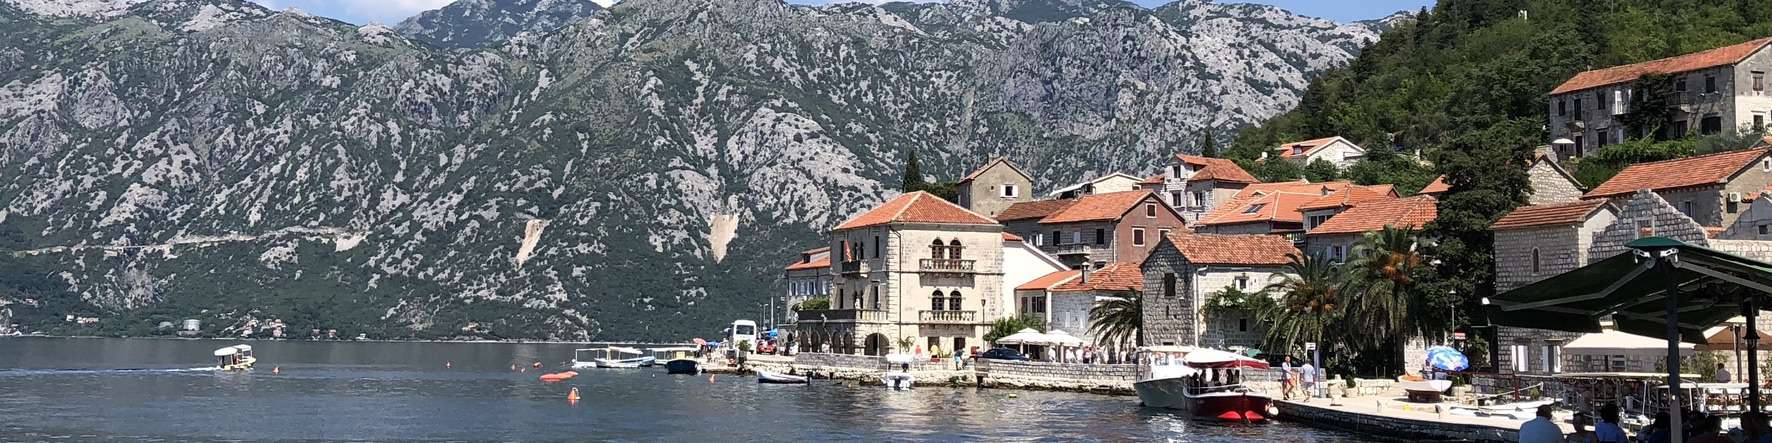 Montenegro day-trip from Dubrovnik